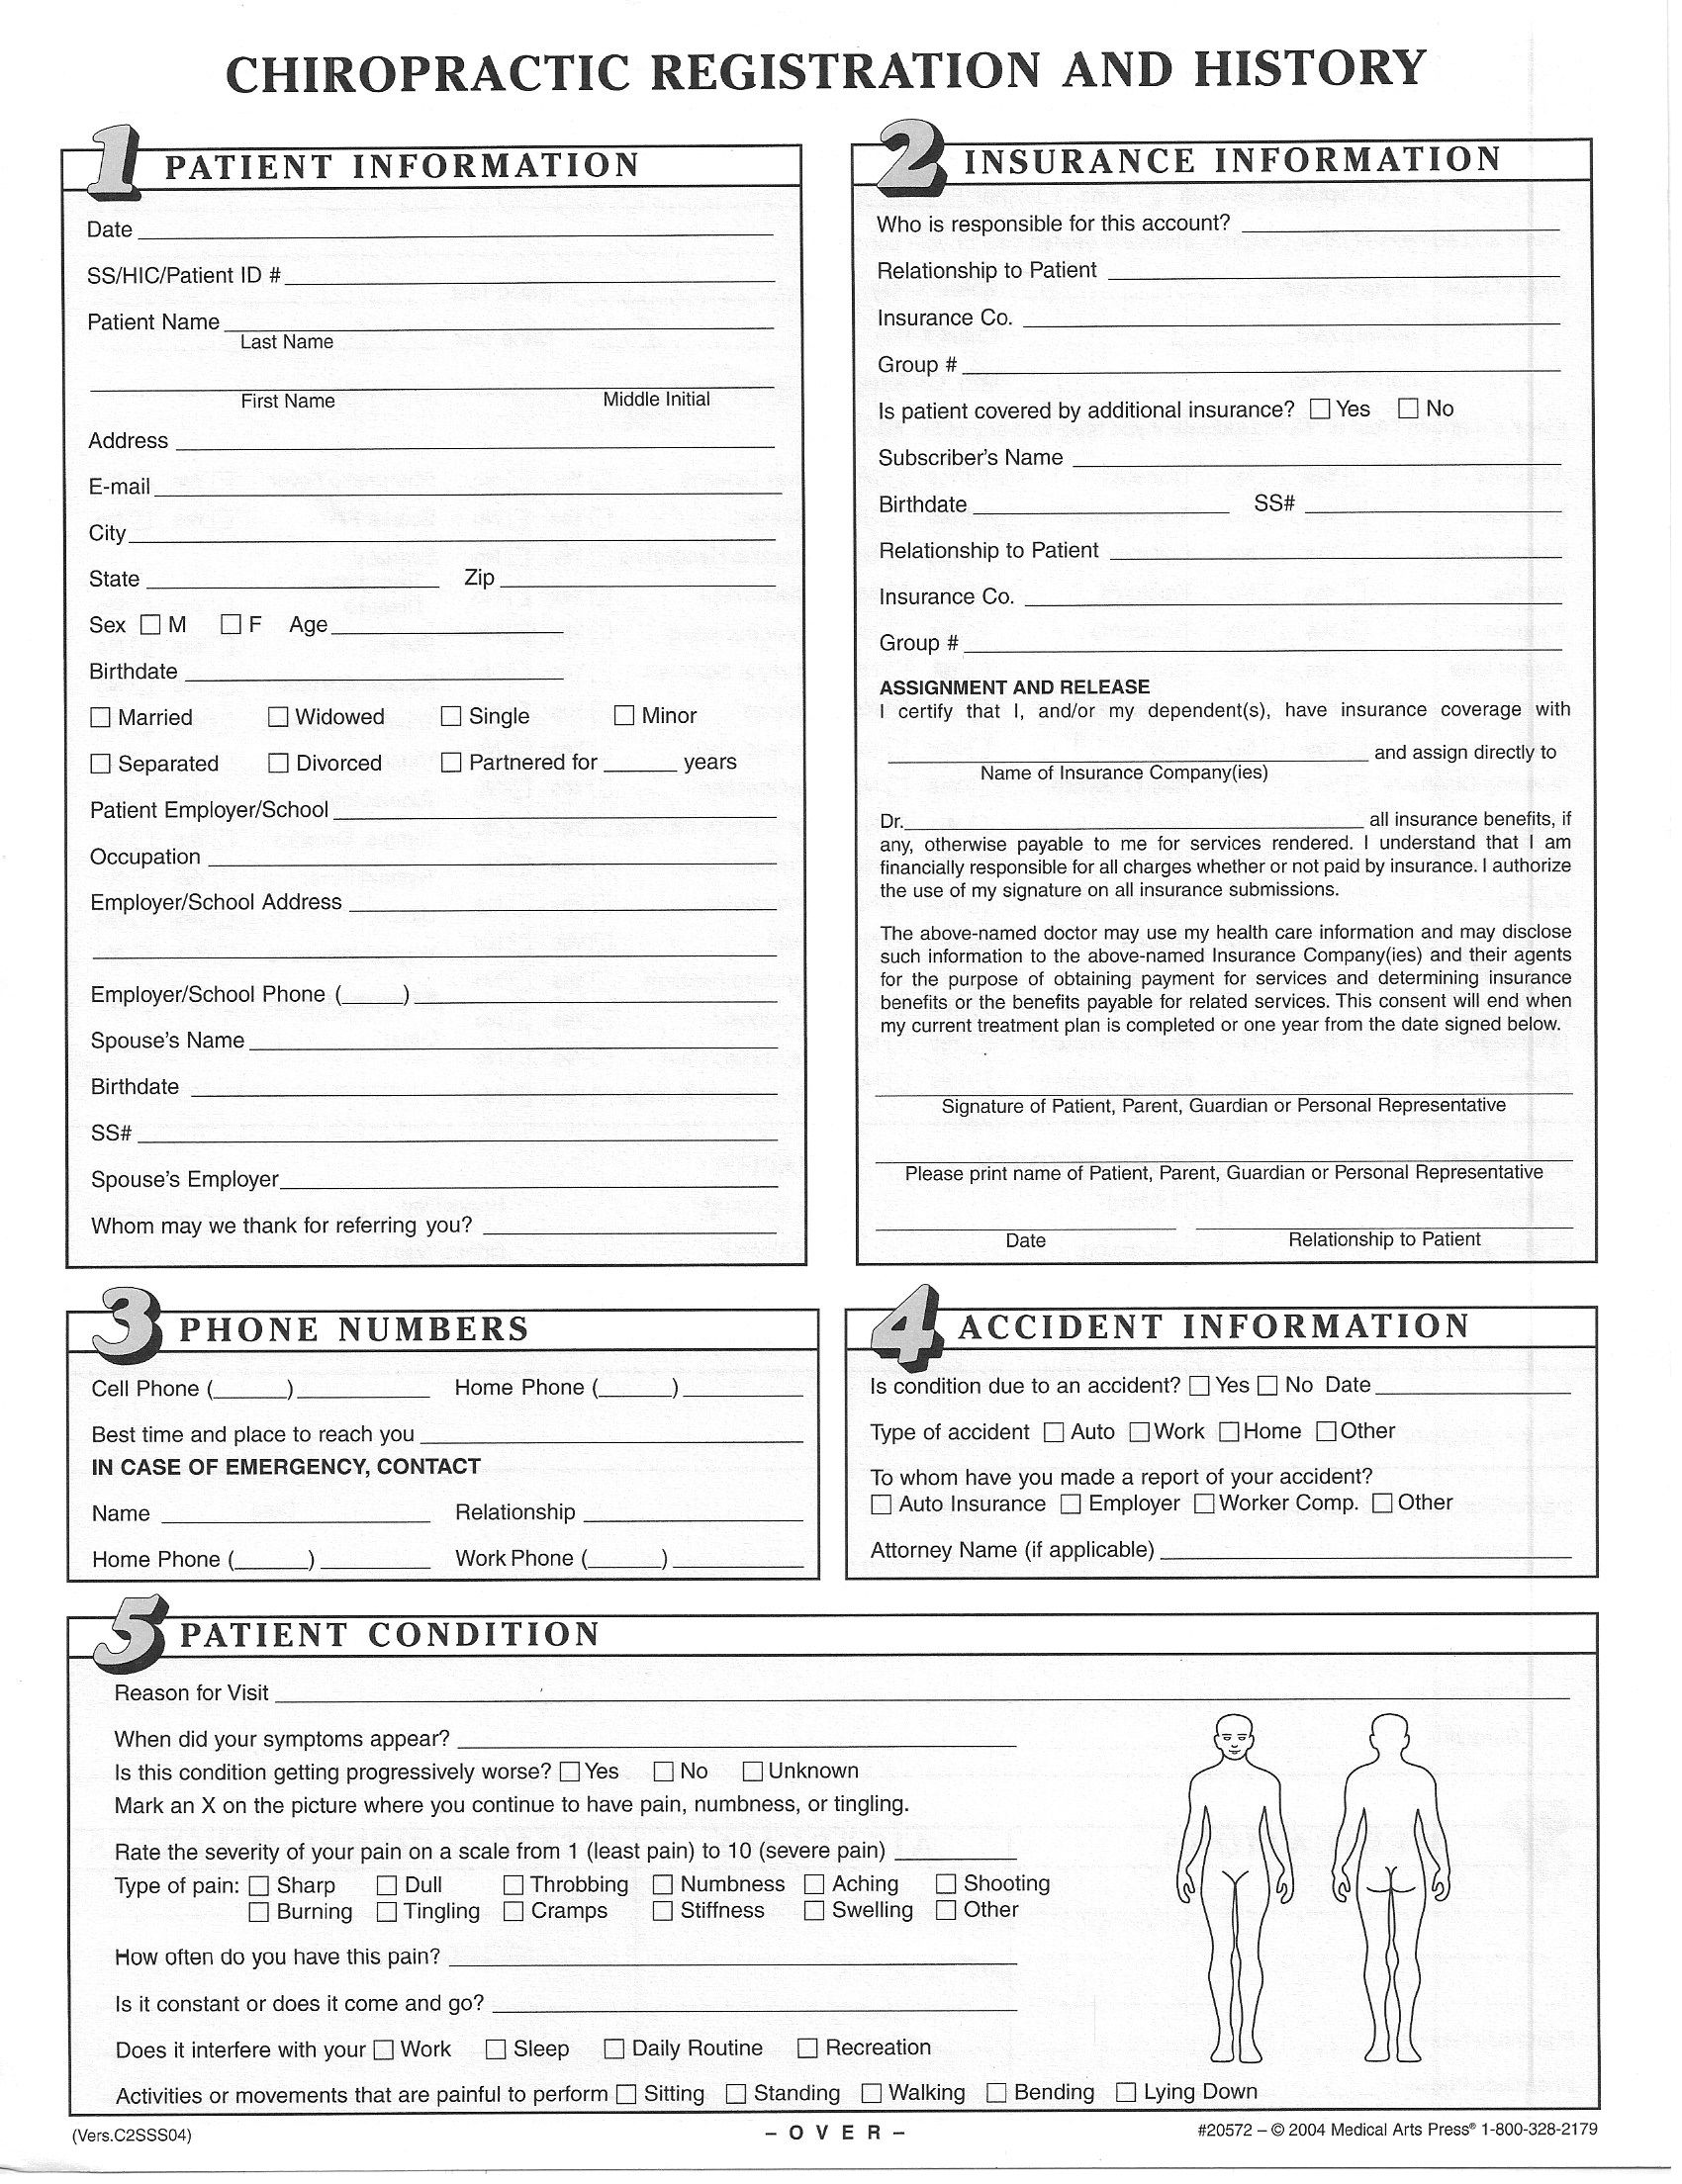 form to fill out prior to office visit